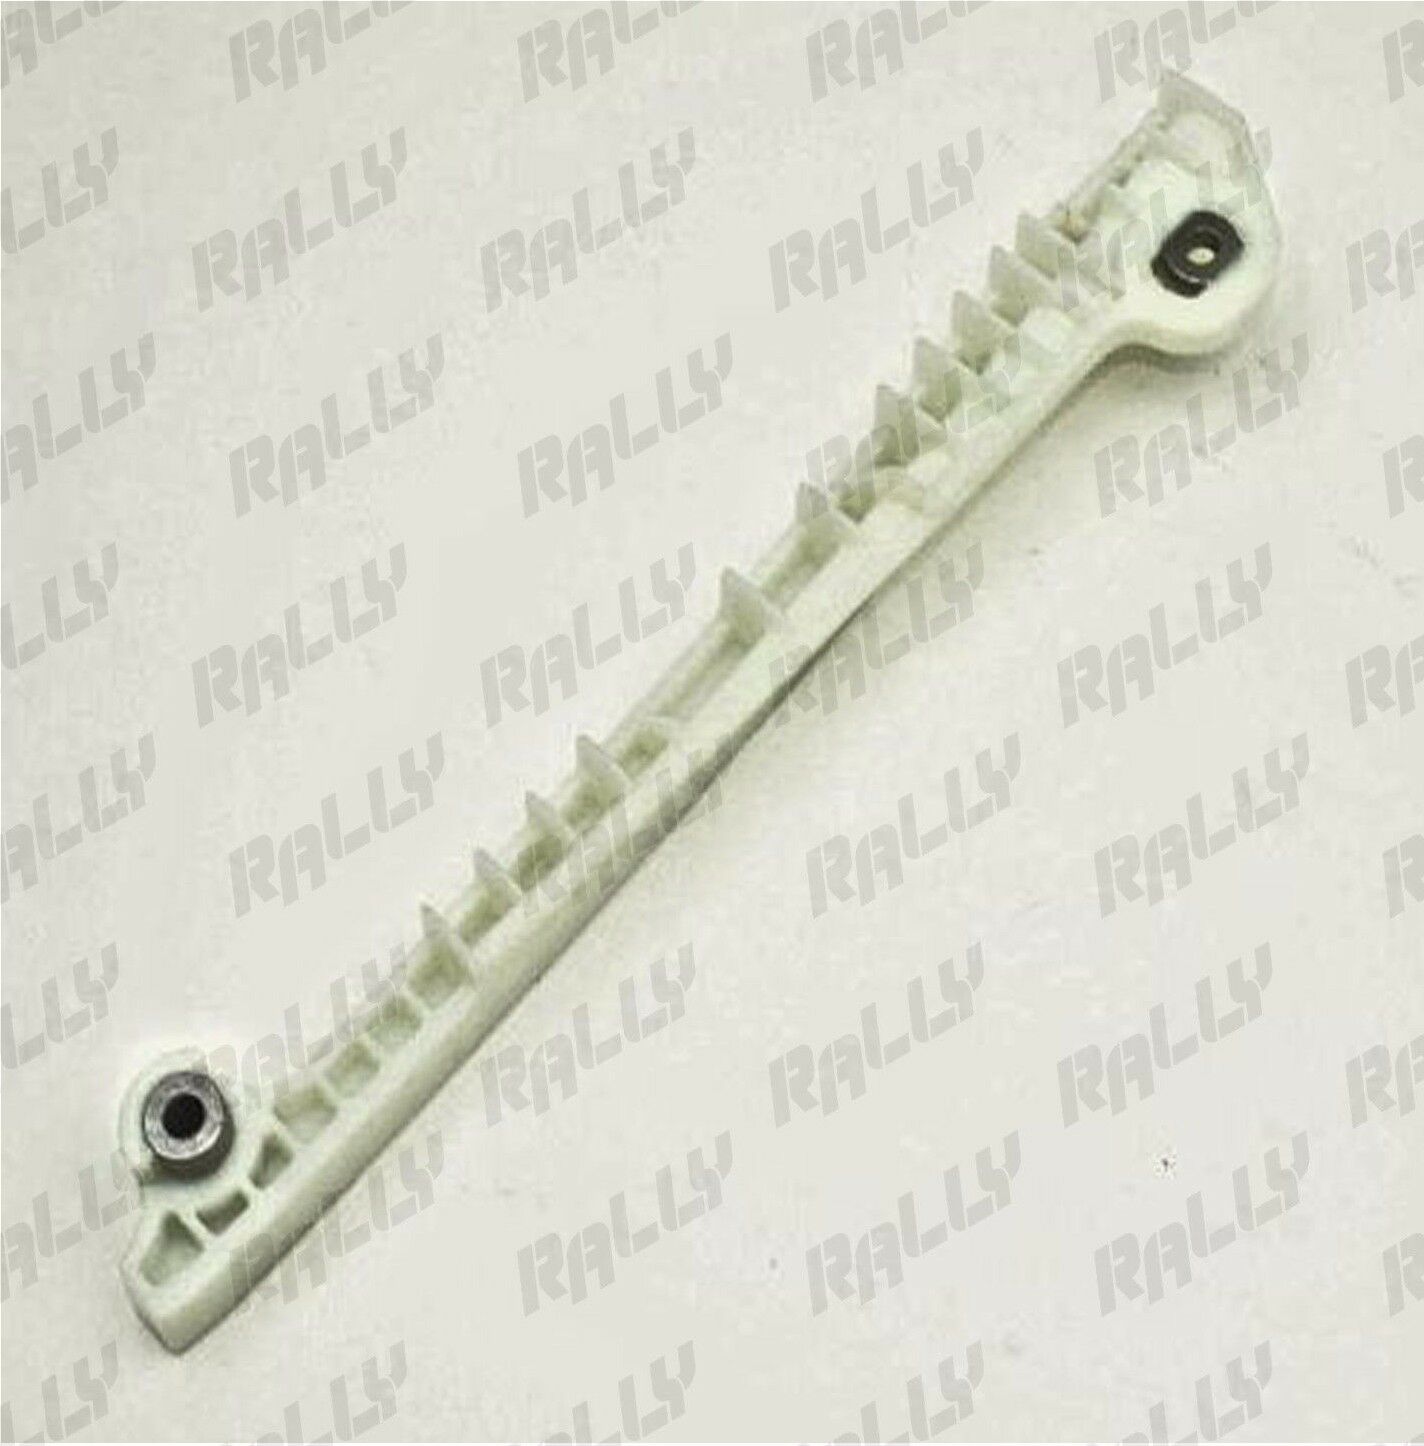 Chain Guide 95429 Ford Crow Victoria Explorer F150 Mustang 4.6l 1997-2014 (1854)